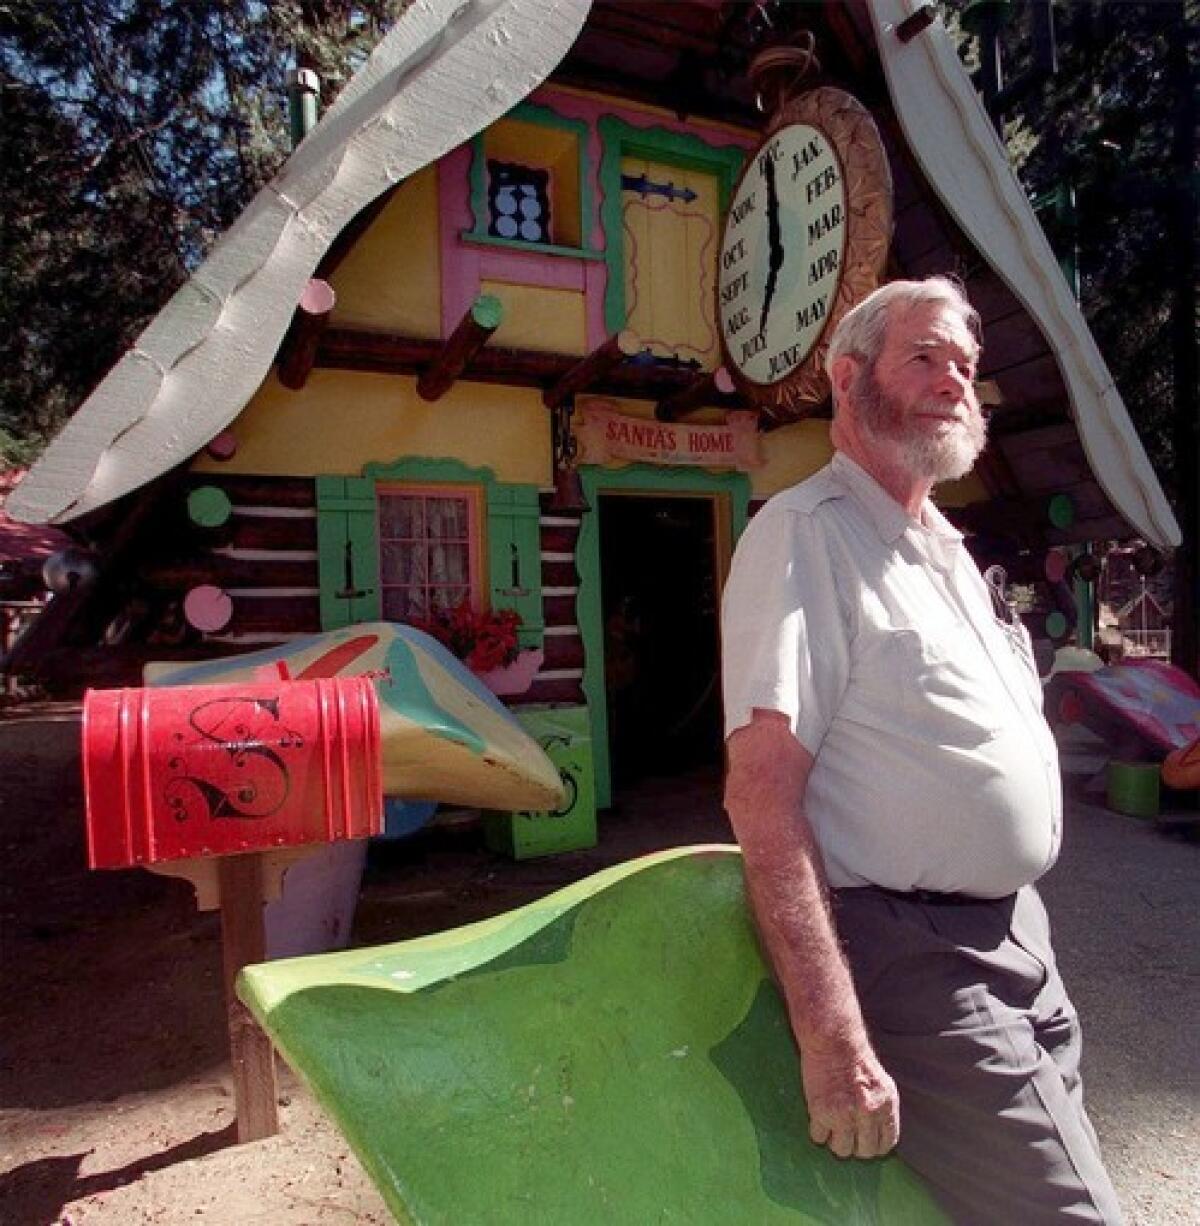 J. Putnam Henck built Santa's Village in the 1950s and owned and operated it during its final two decades. He and his wife lived at the attraction and worked "seven days a week, 12 hours a day," he said.